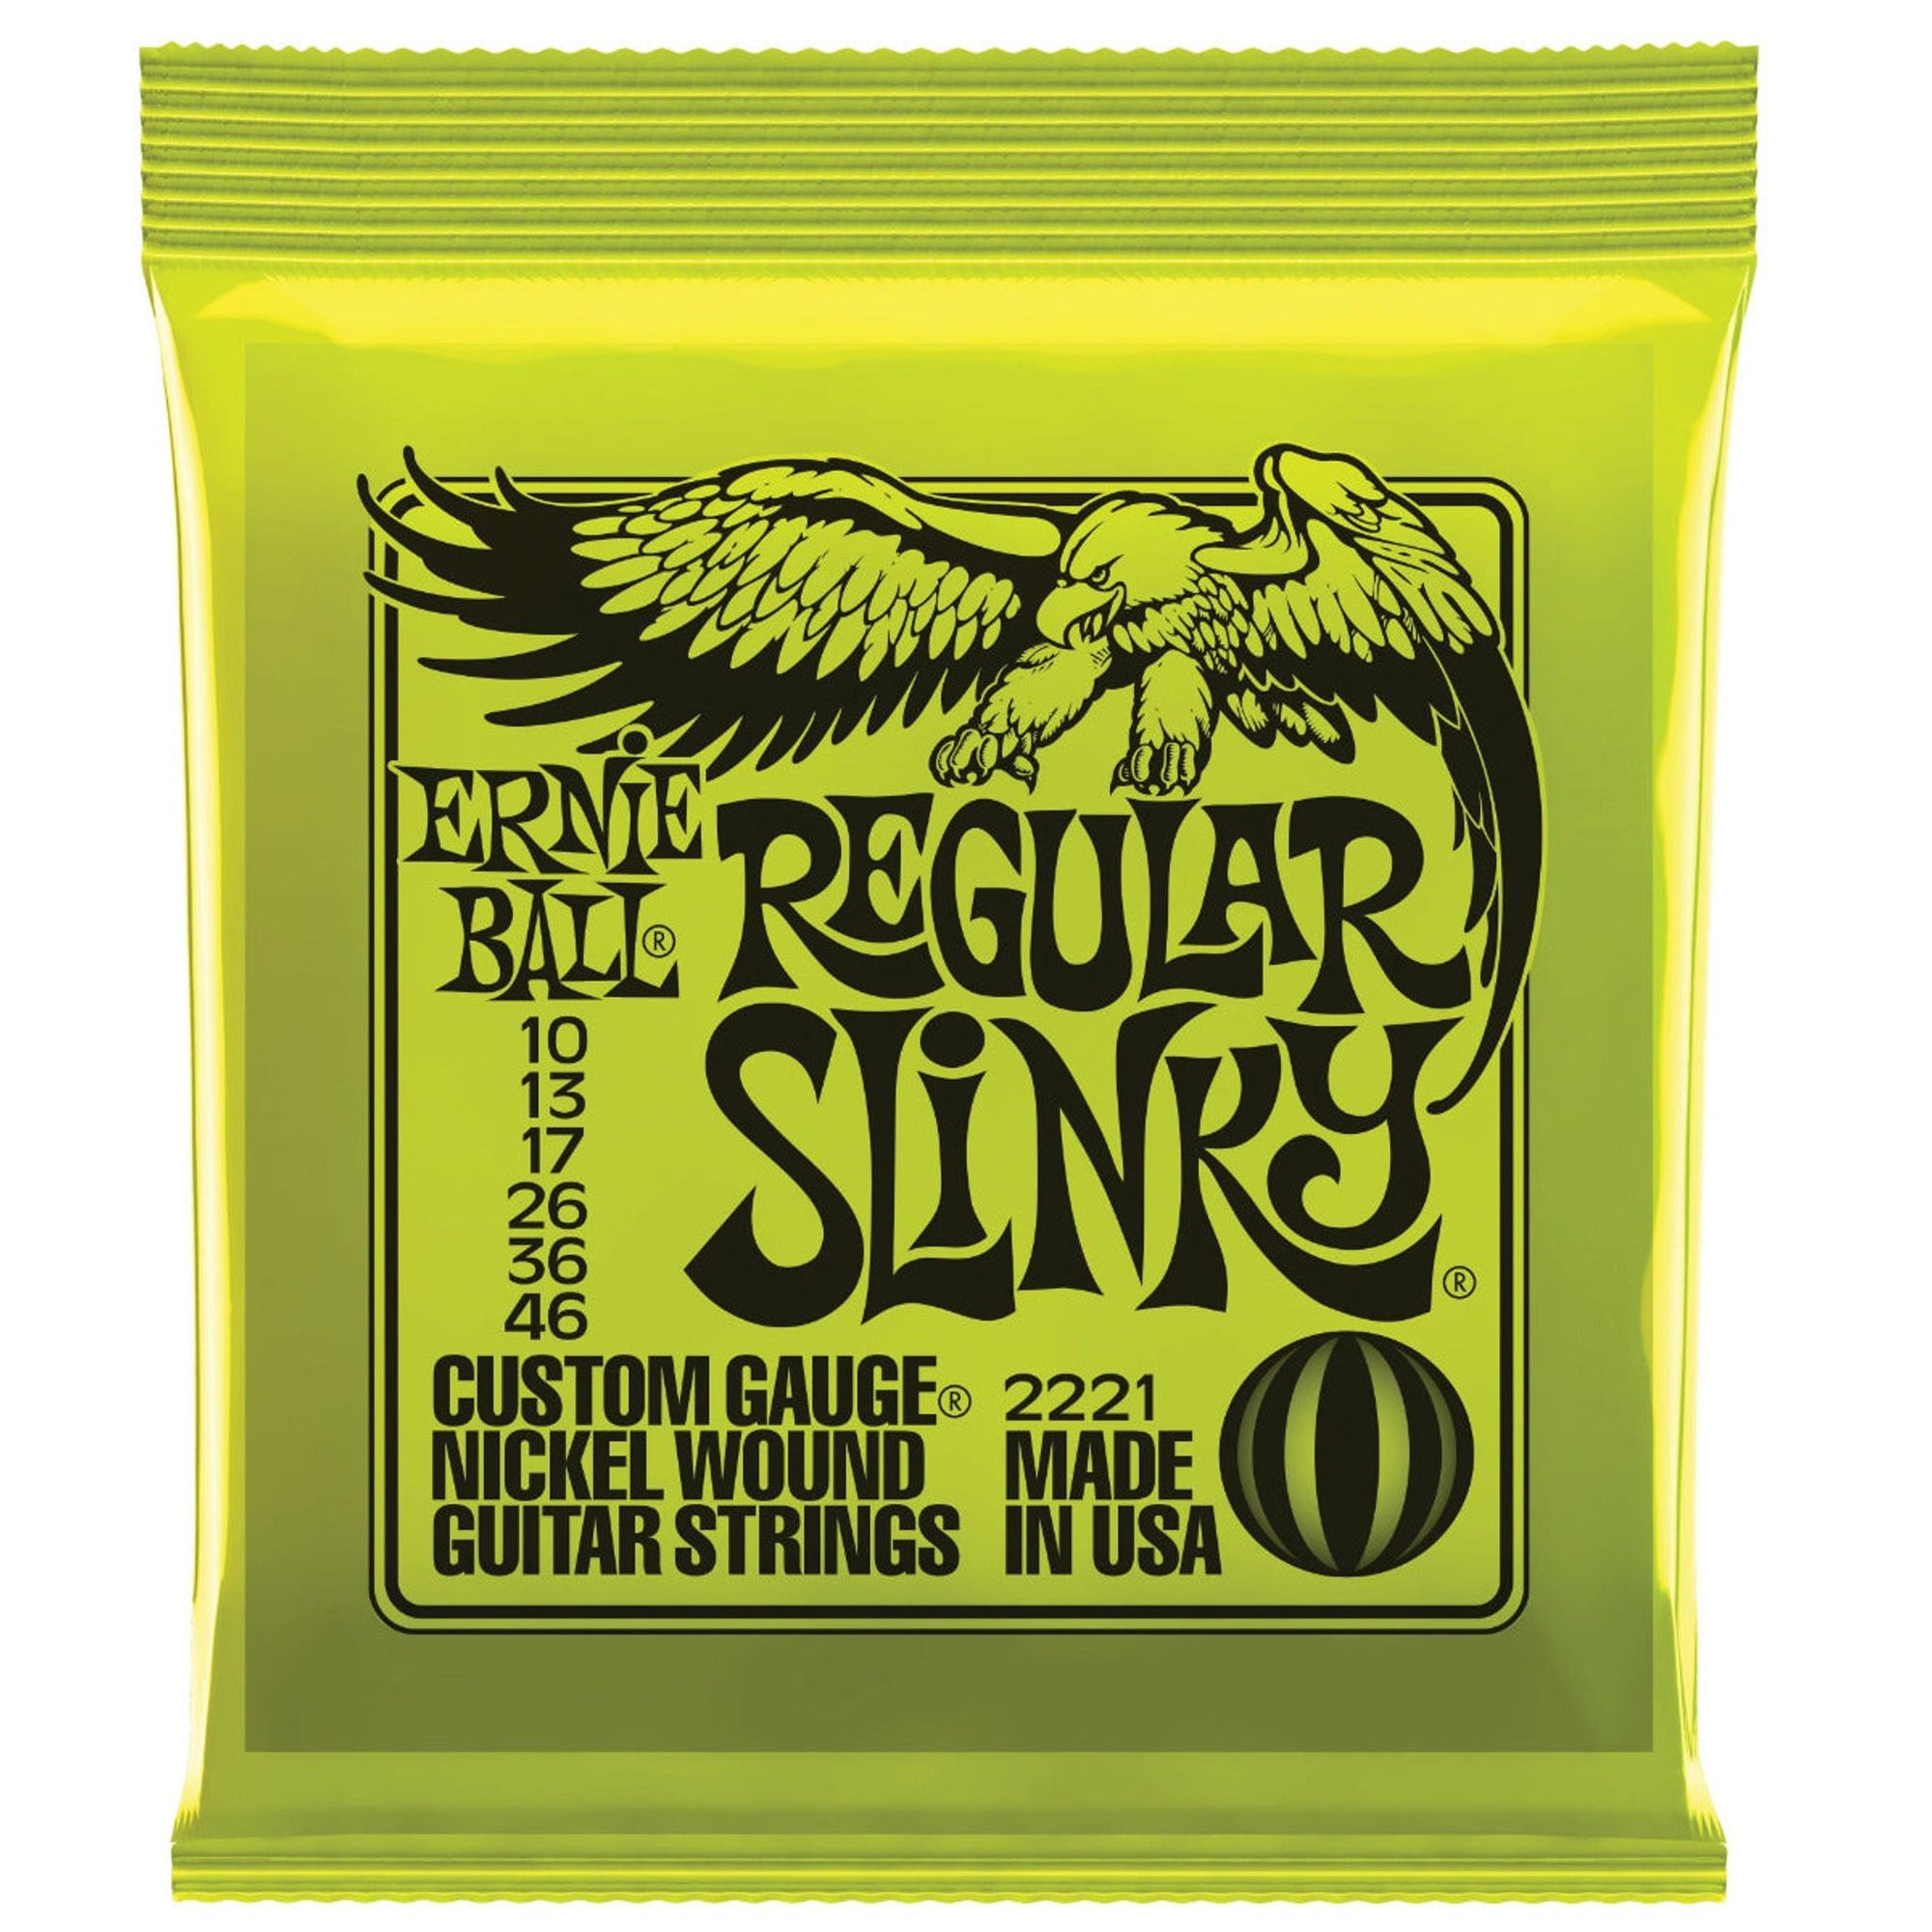 Ernie Ball Nickel Wound Electric Guitar Strings are made from nickel plated steel wire wrapped around tin plated hex shaped steel core wire. The plain strings are made of specially tempered tin plated high carbon steel producing a well balanced tone for your guitar. 